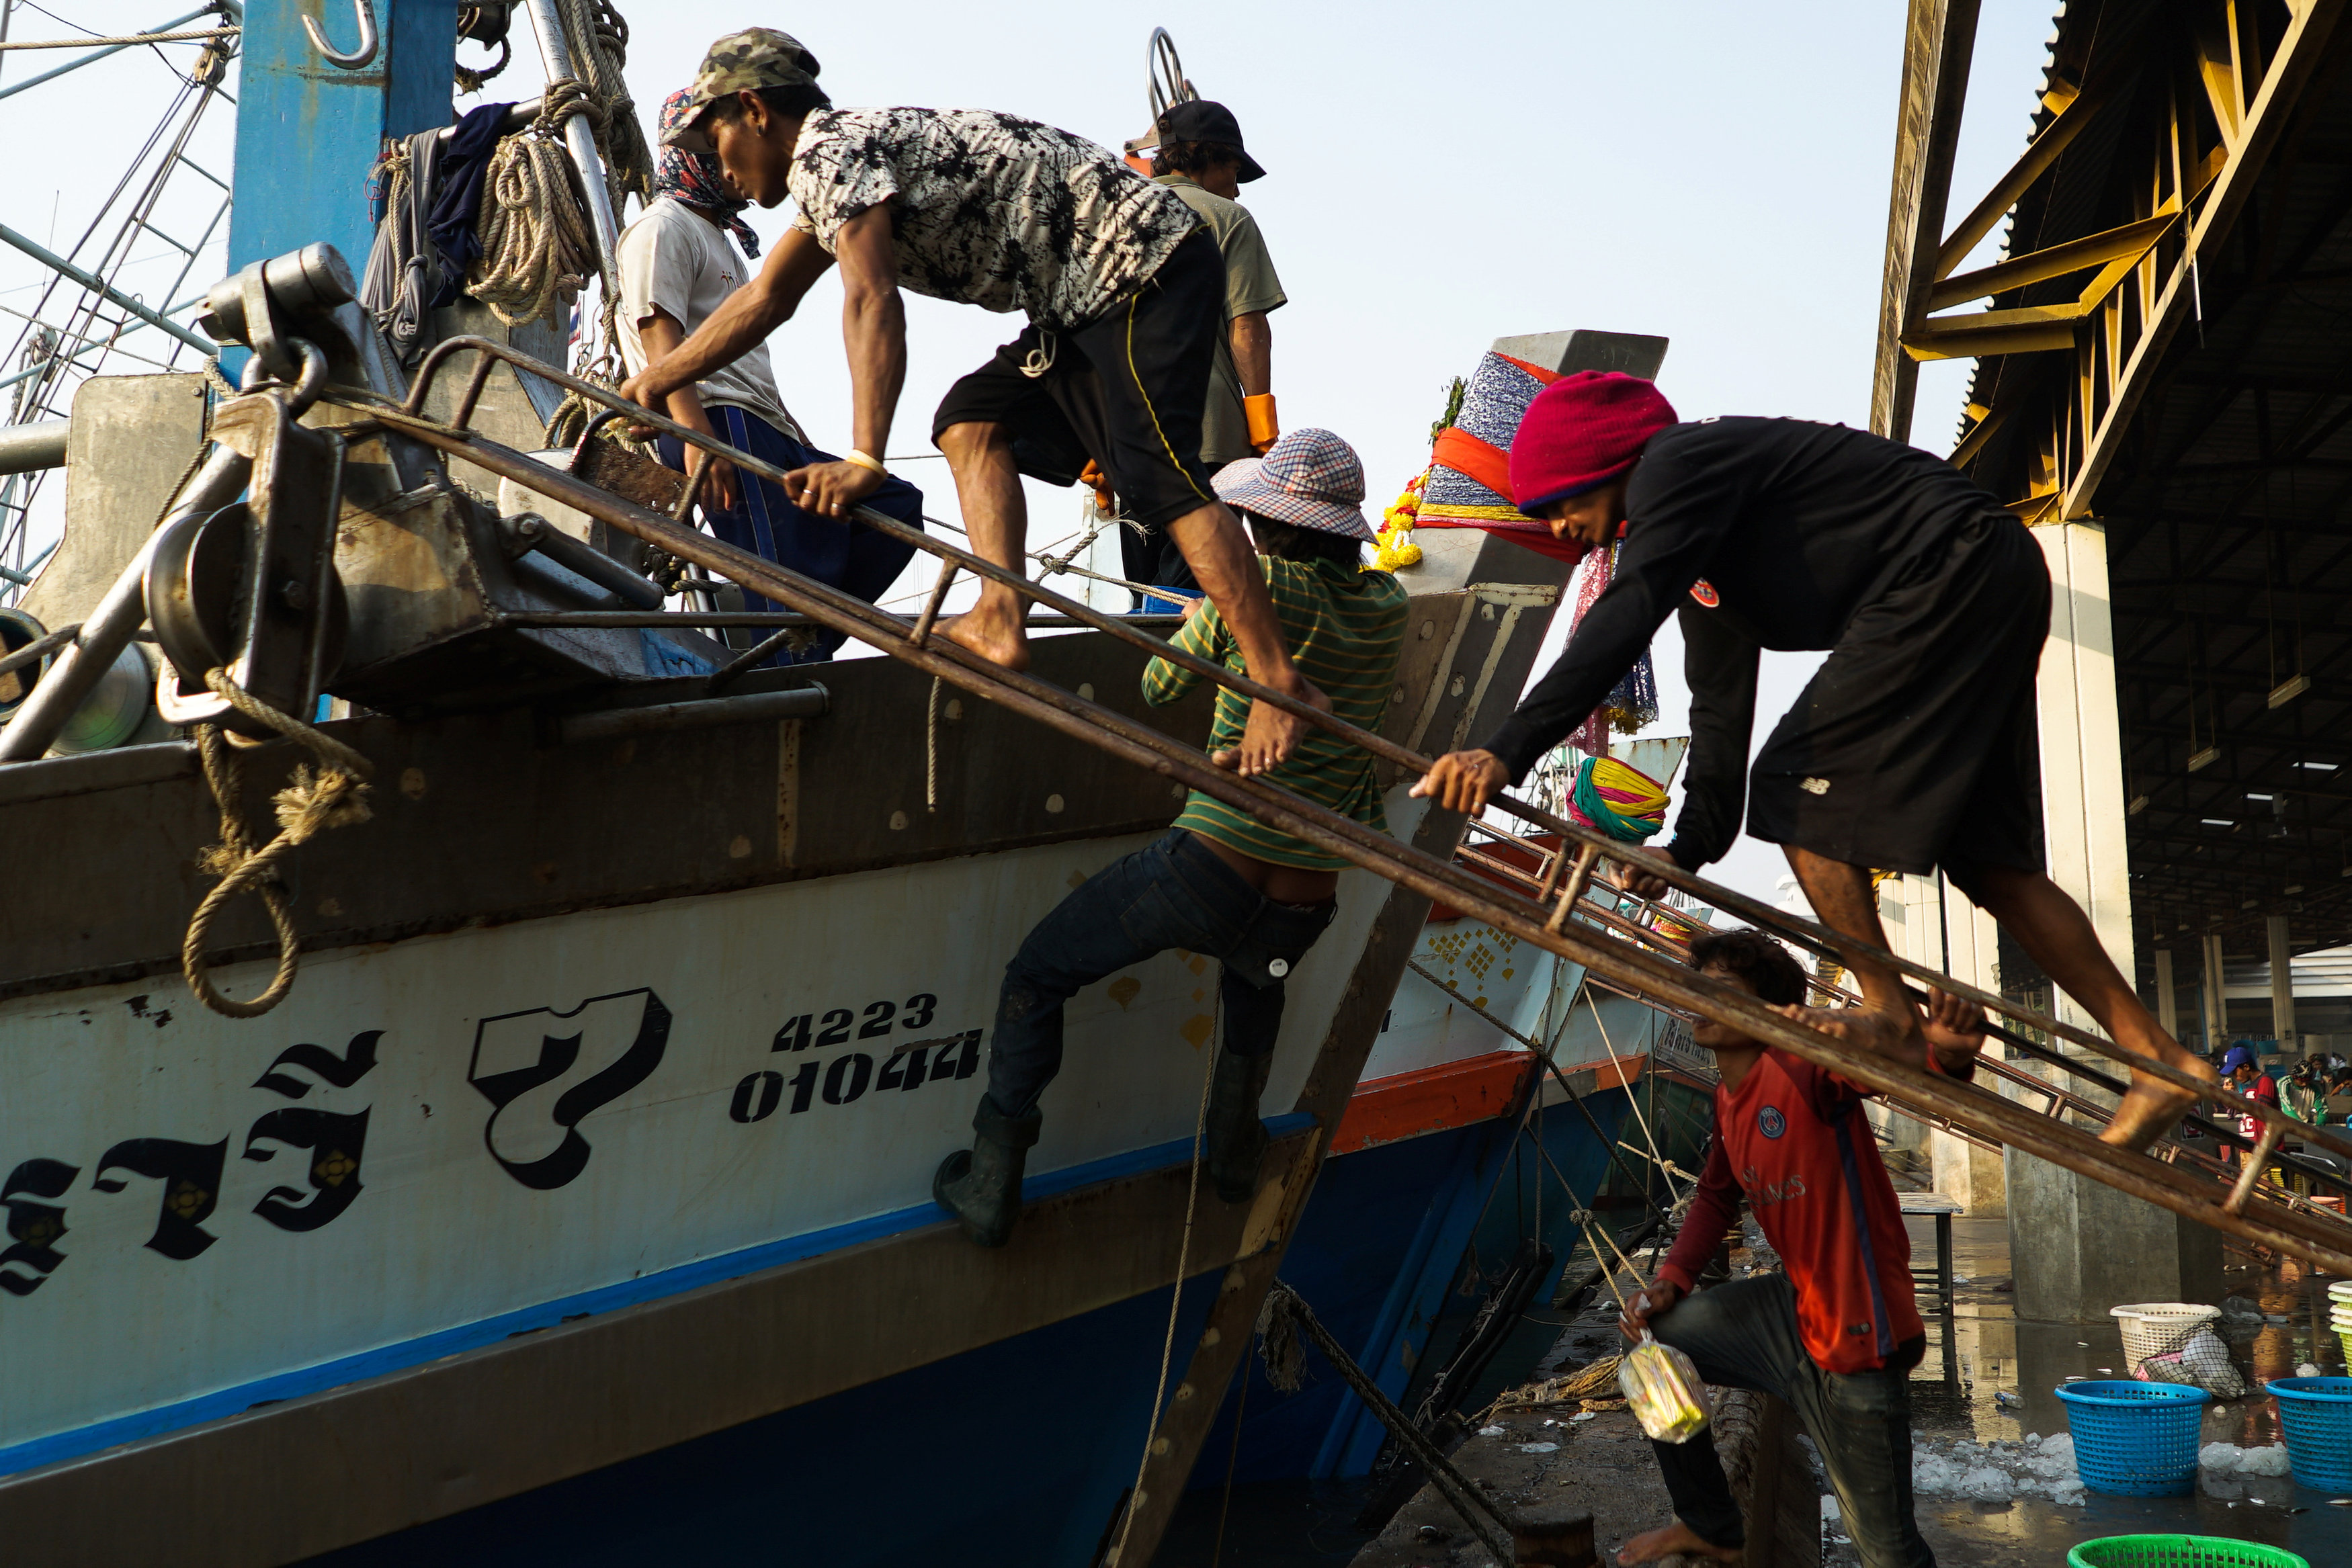 Grim tales in Thailand fishing sector despite reforms